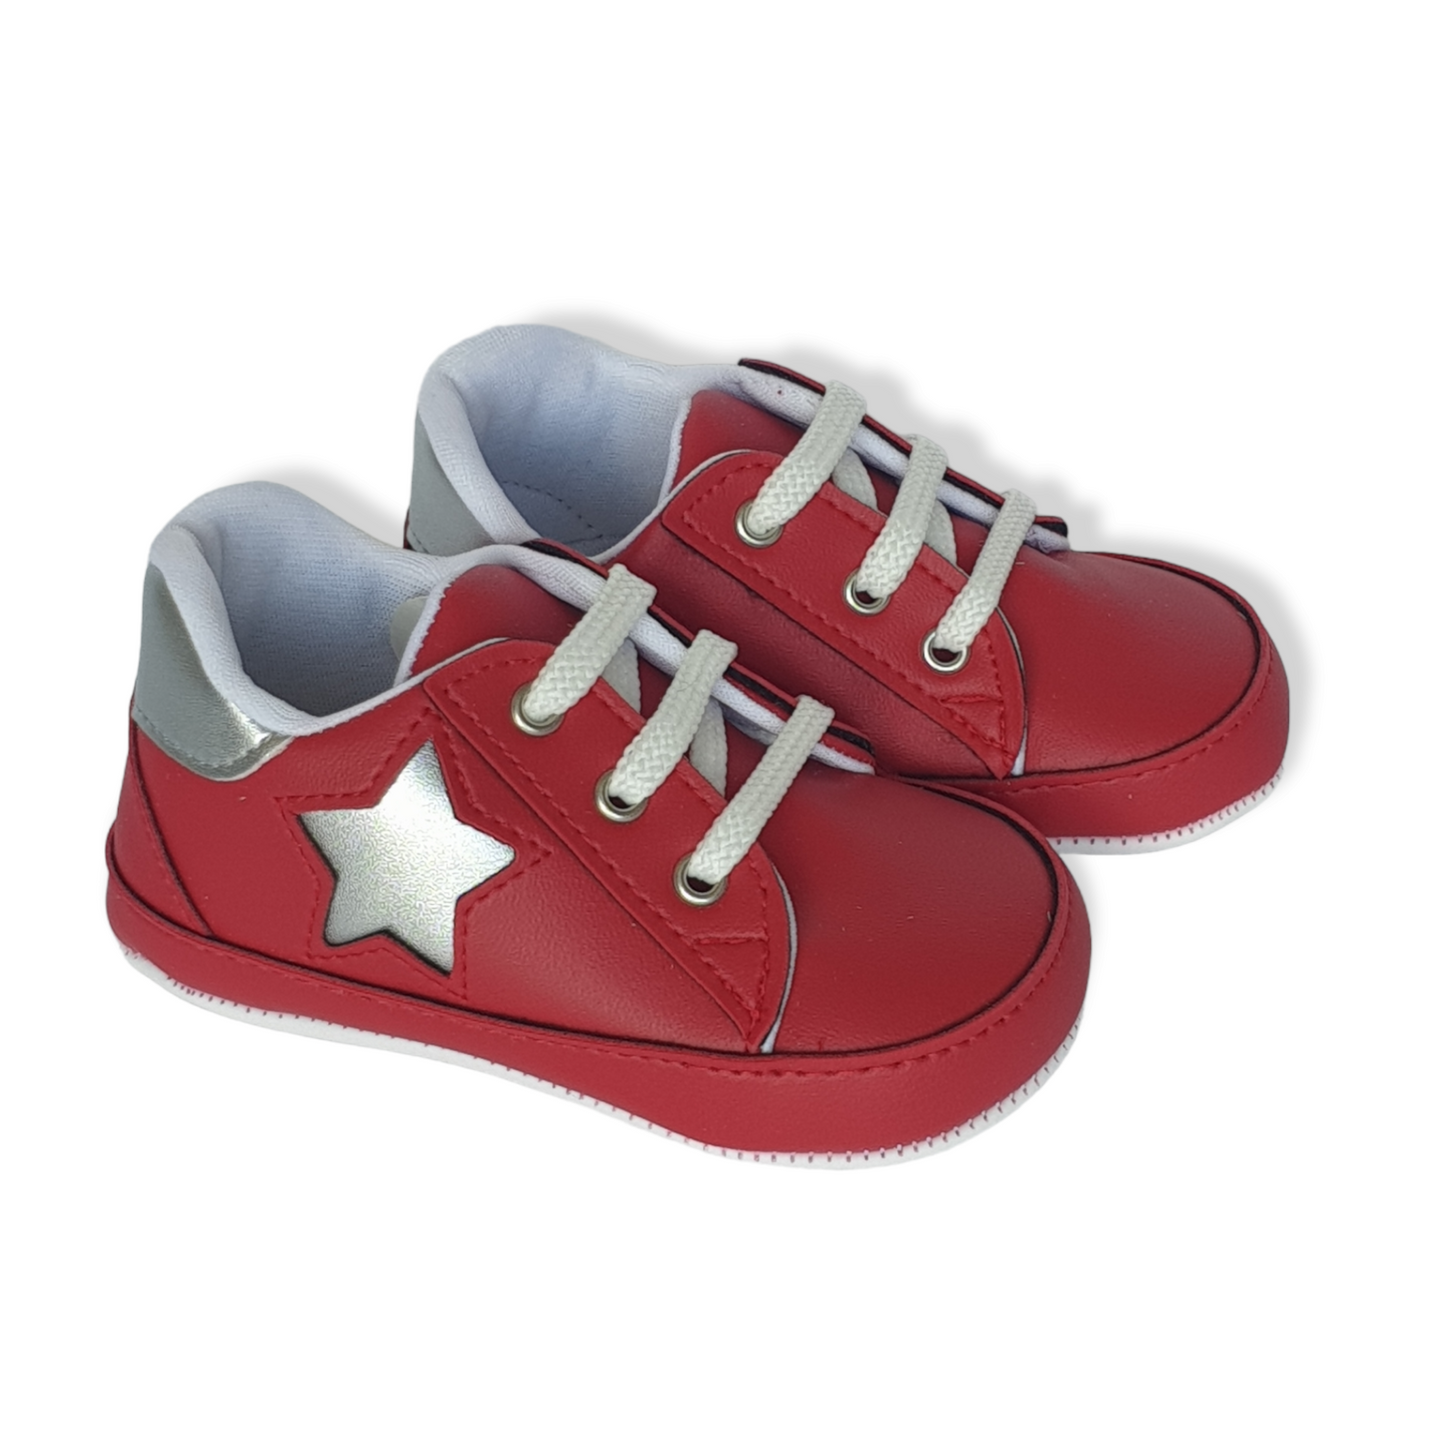 Star Red Sport Baby Shoes-Baby shoe, Boots, catgirl, catshoes, Red, Shoe, Shoes, Silver, Sneakers, Sport, Star-Papulin-[Too Twee]-[Tootwee]-[baby]-[newborn]-[clothes]-[essentials]-[toys]-[Lebanon]